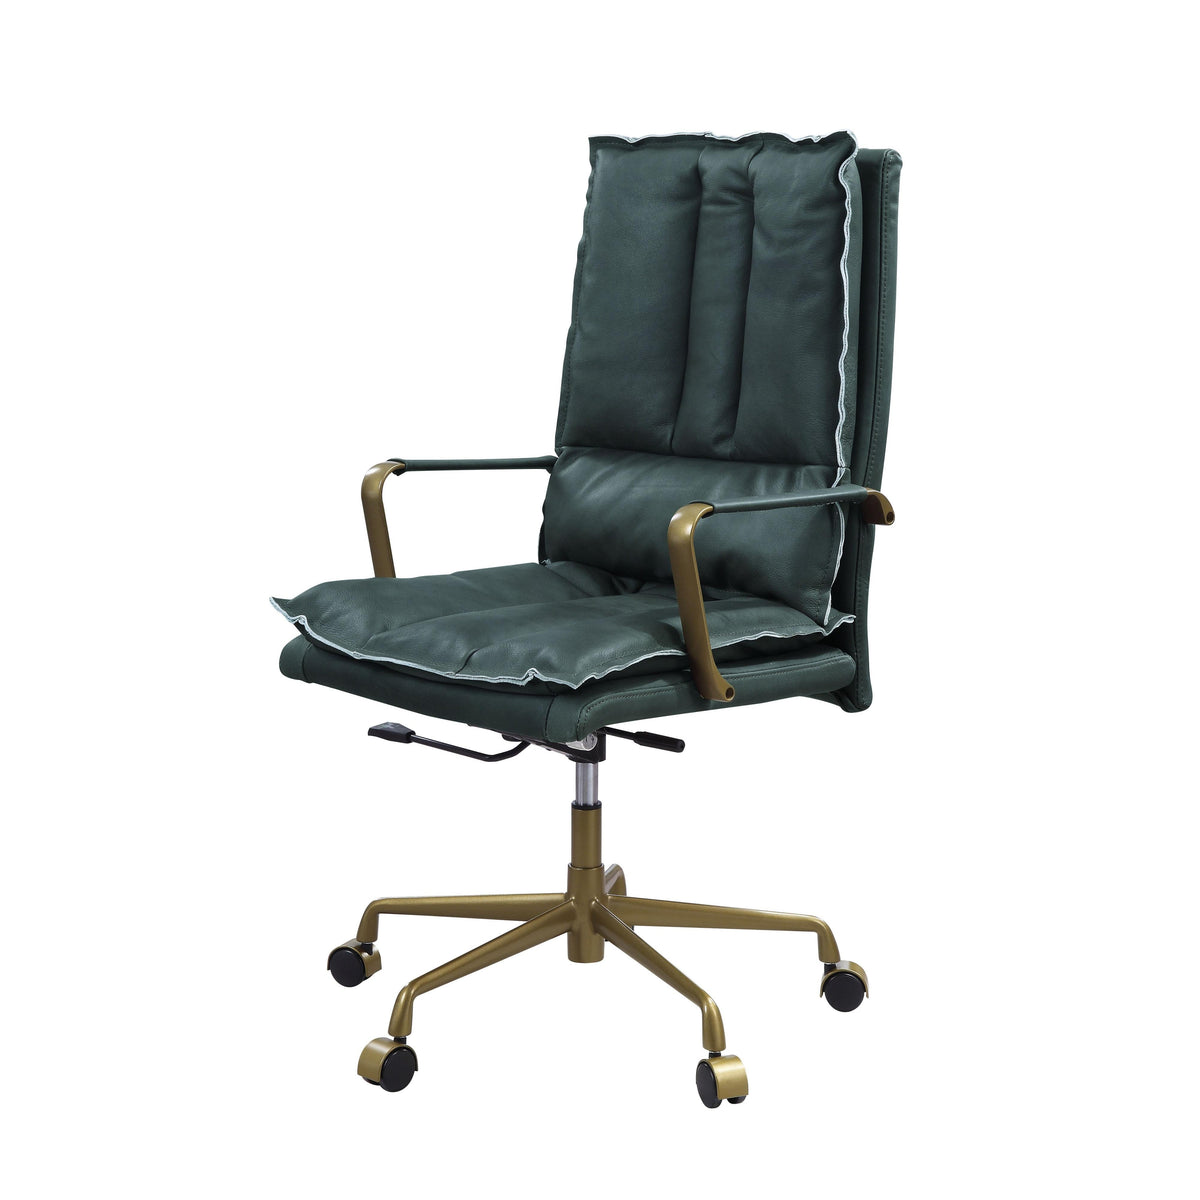 Acme Furniture Tinzud 93166 Office Chair